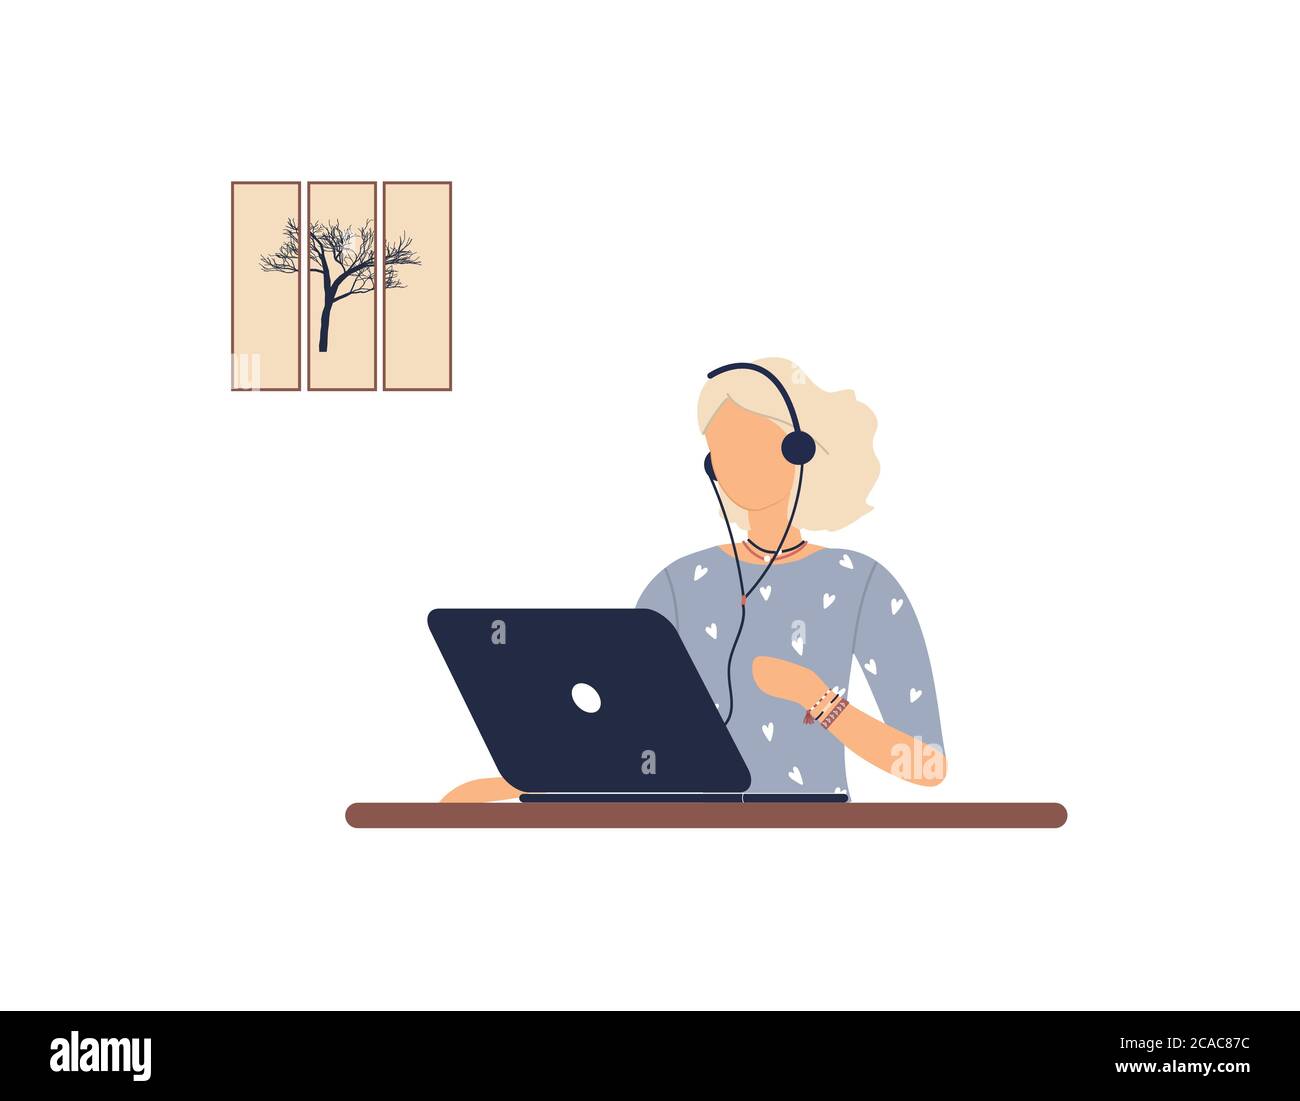 Girl tutor with headphones work on laptop.Remote work, distance learning or online training during the virus epidemic.Lady trainer or coach Stock Vector